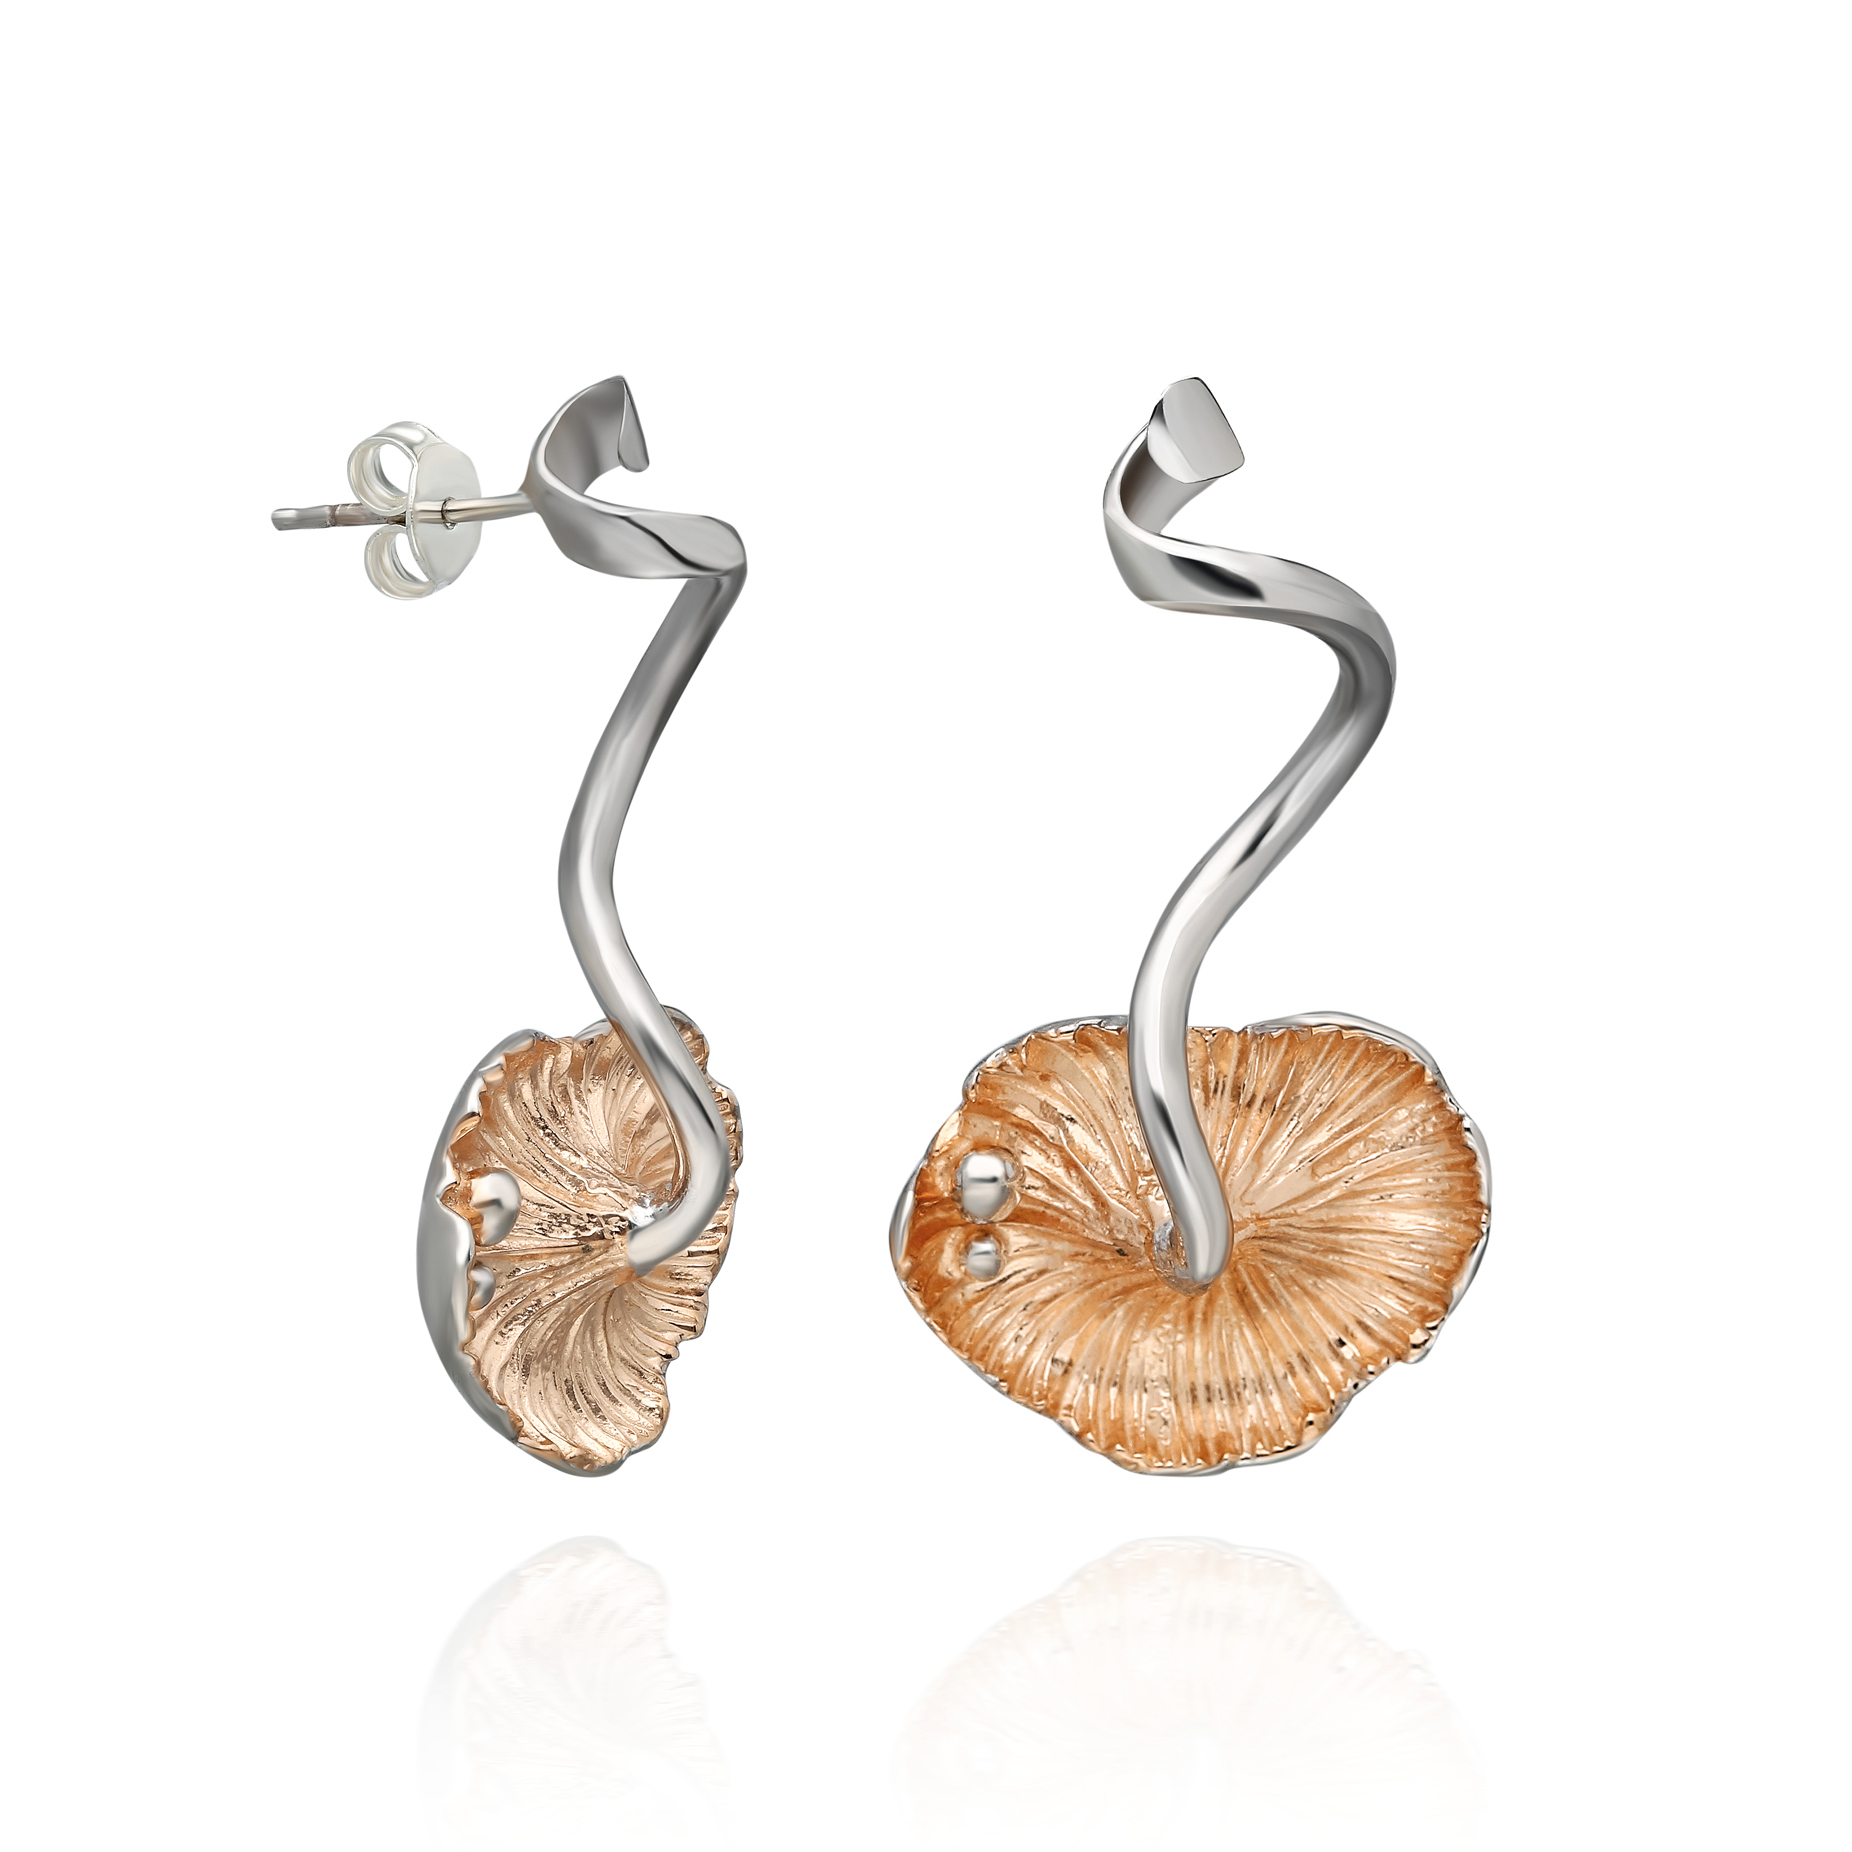 Mushroom, Nature Inspired Silver Earrings and Rose Gold Plated -Mushroom Collection